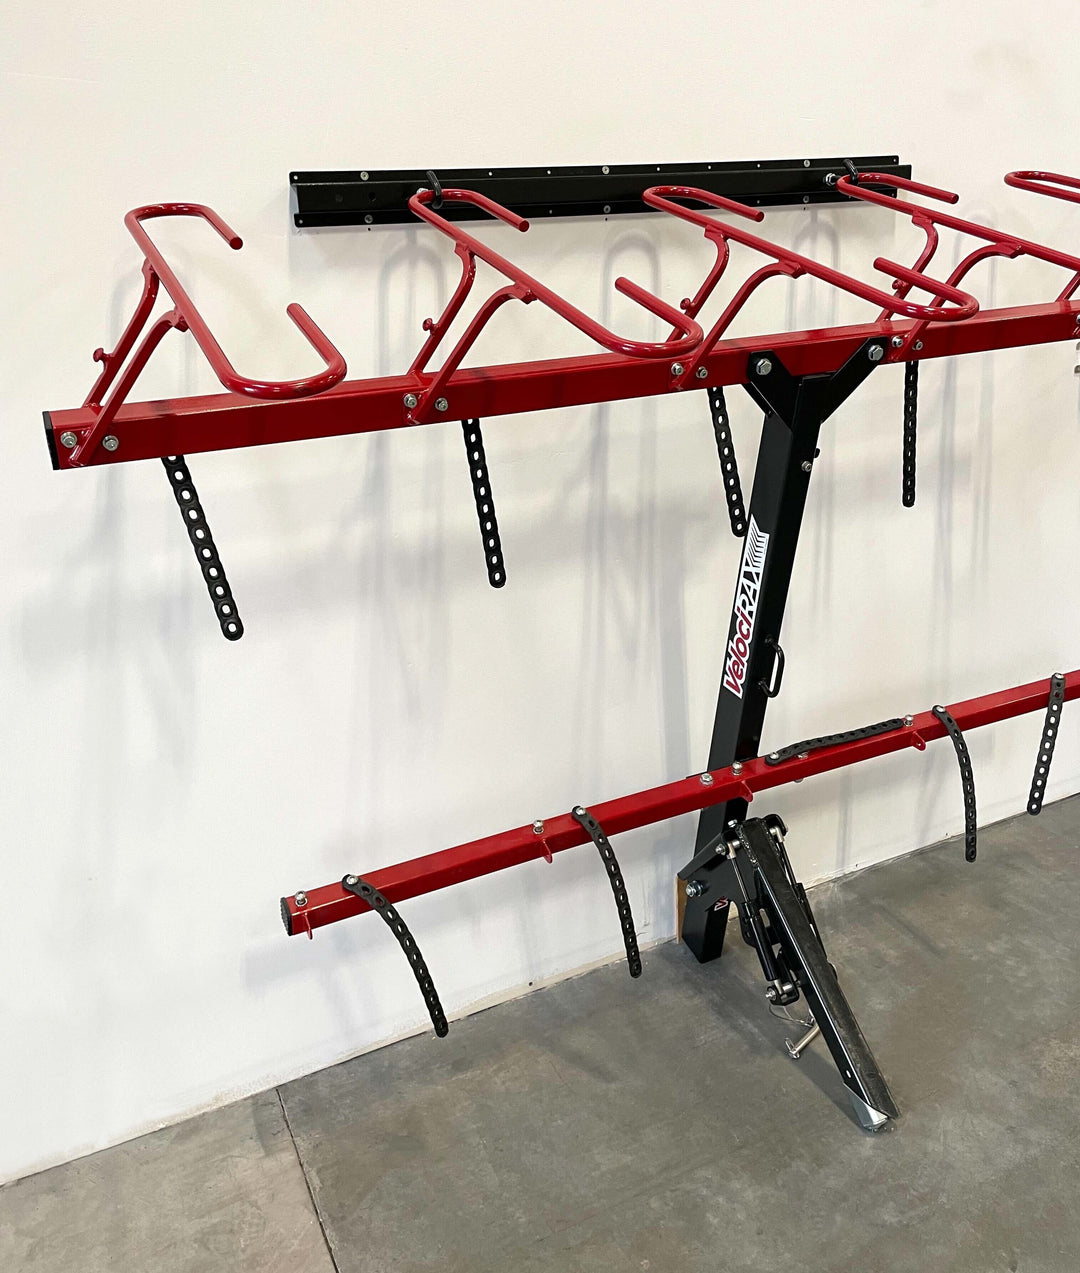 VelociRAX 7: The Best 7 Bike Hitch Rack Available